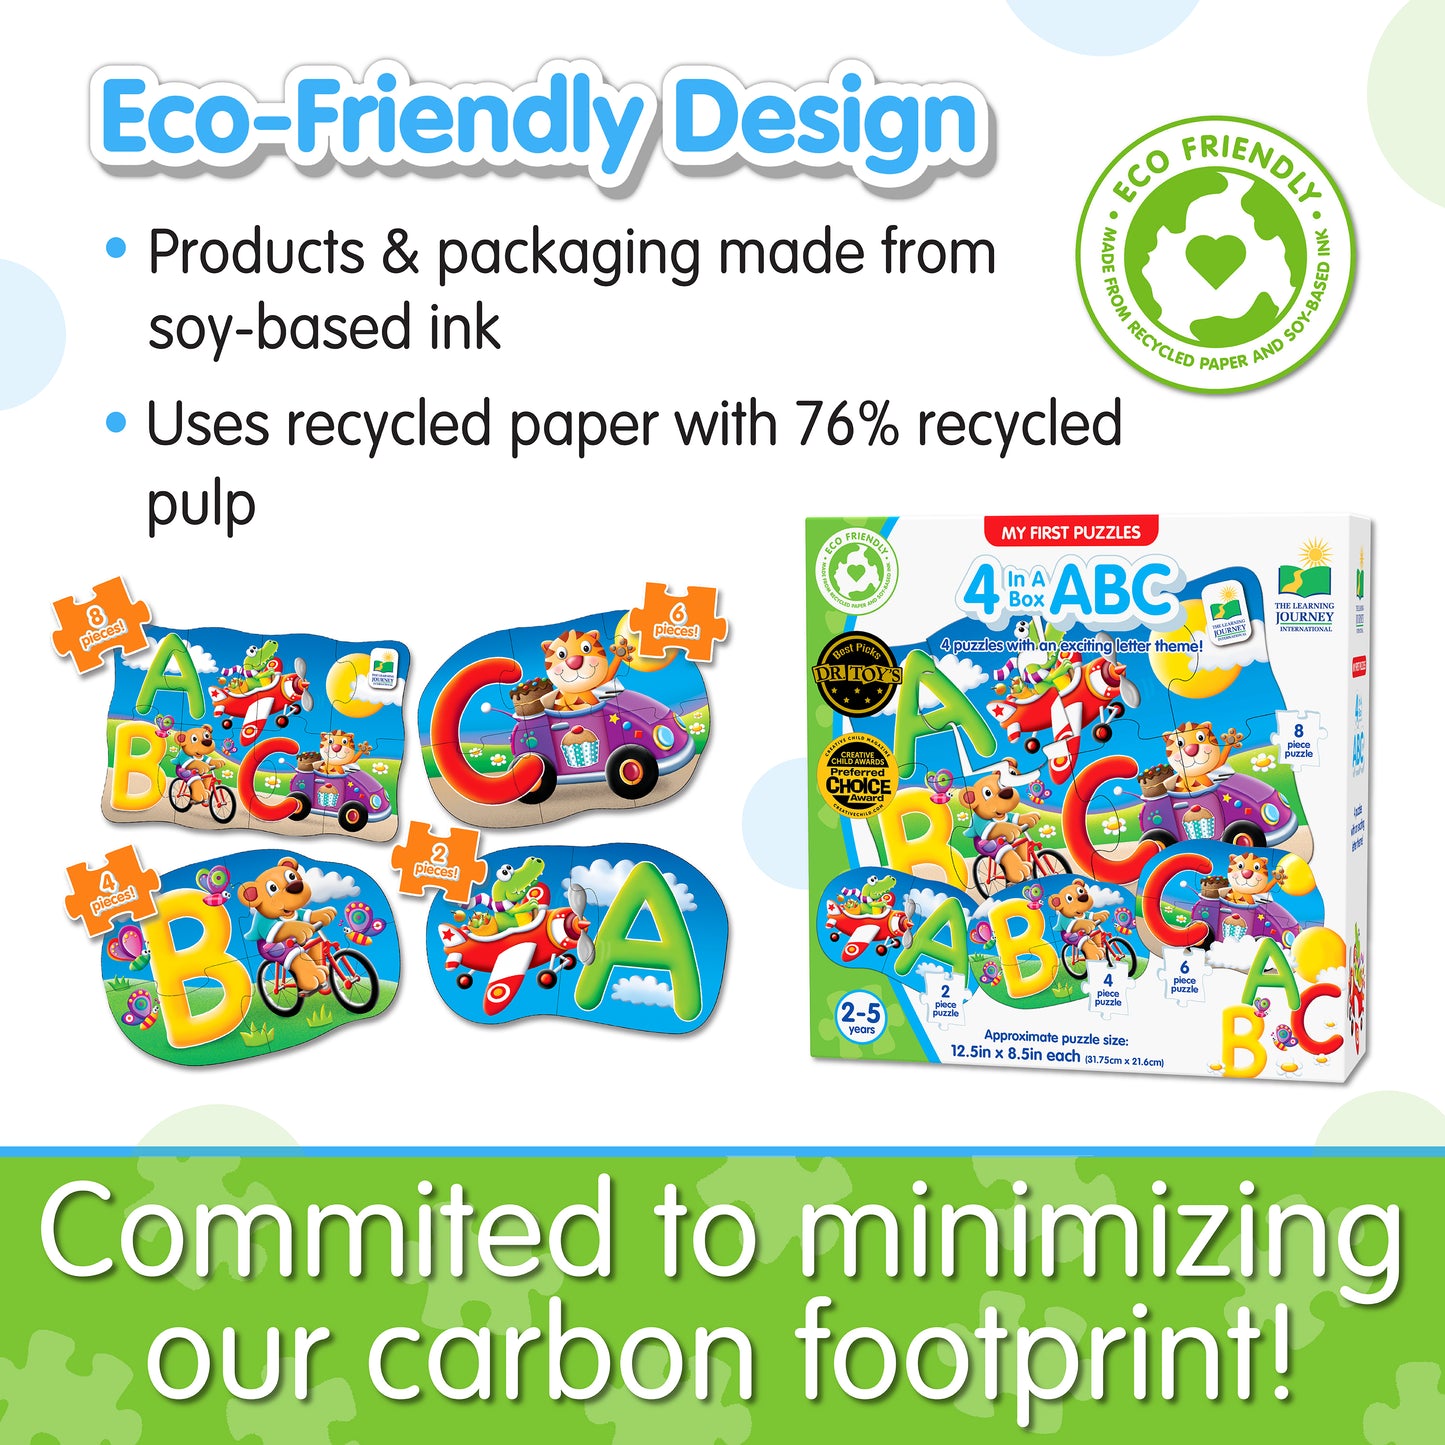 Infographic about 4-In-A-Box ABC Puzzle's eco-friendly design that says, "Committed to minimizing our carbon footprint!"